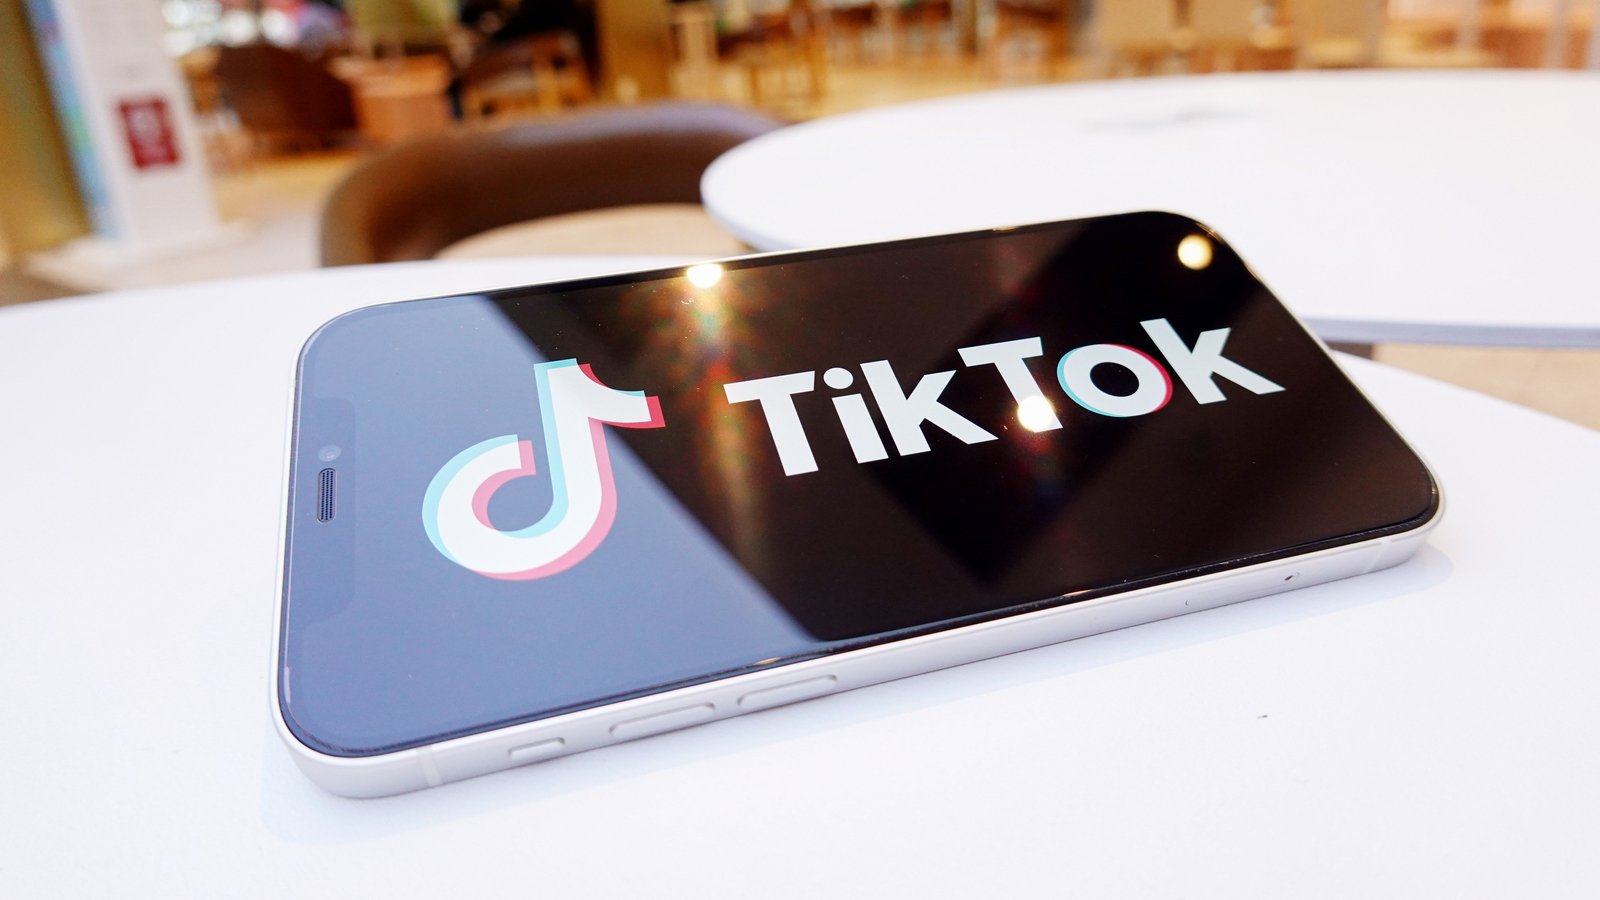 TikTok launches online shopping in the US